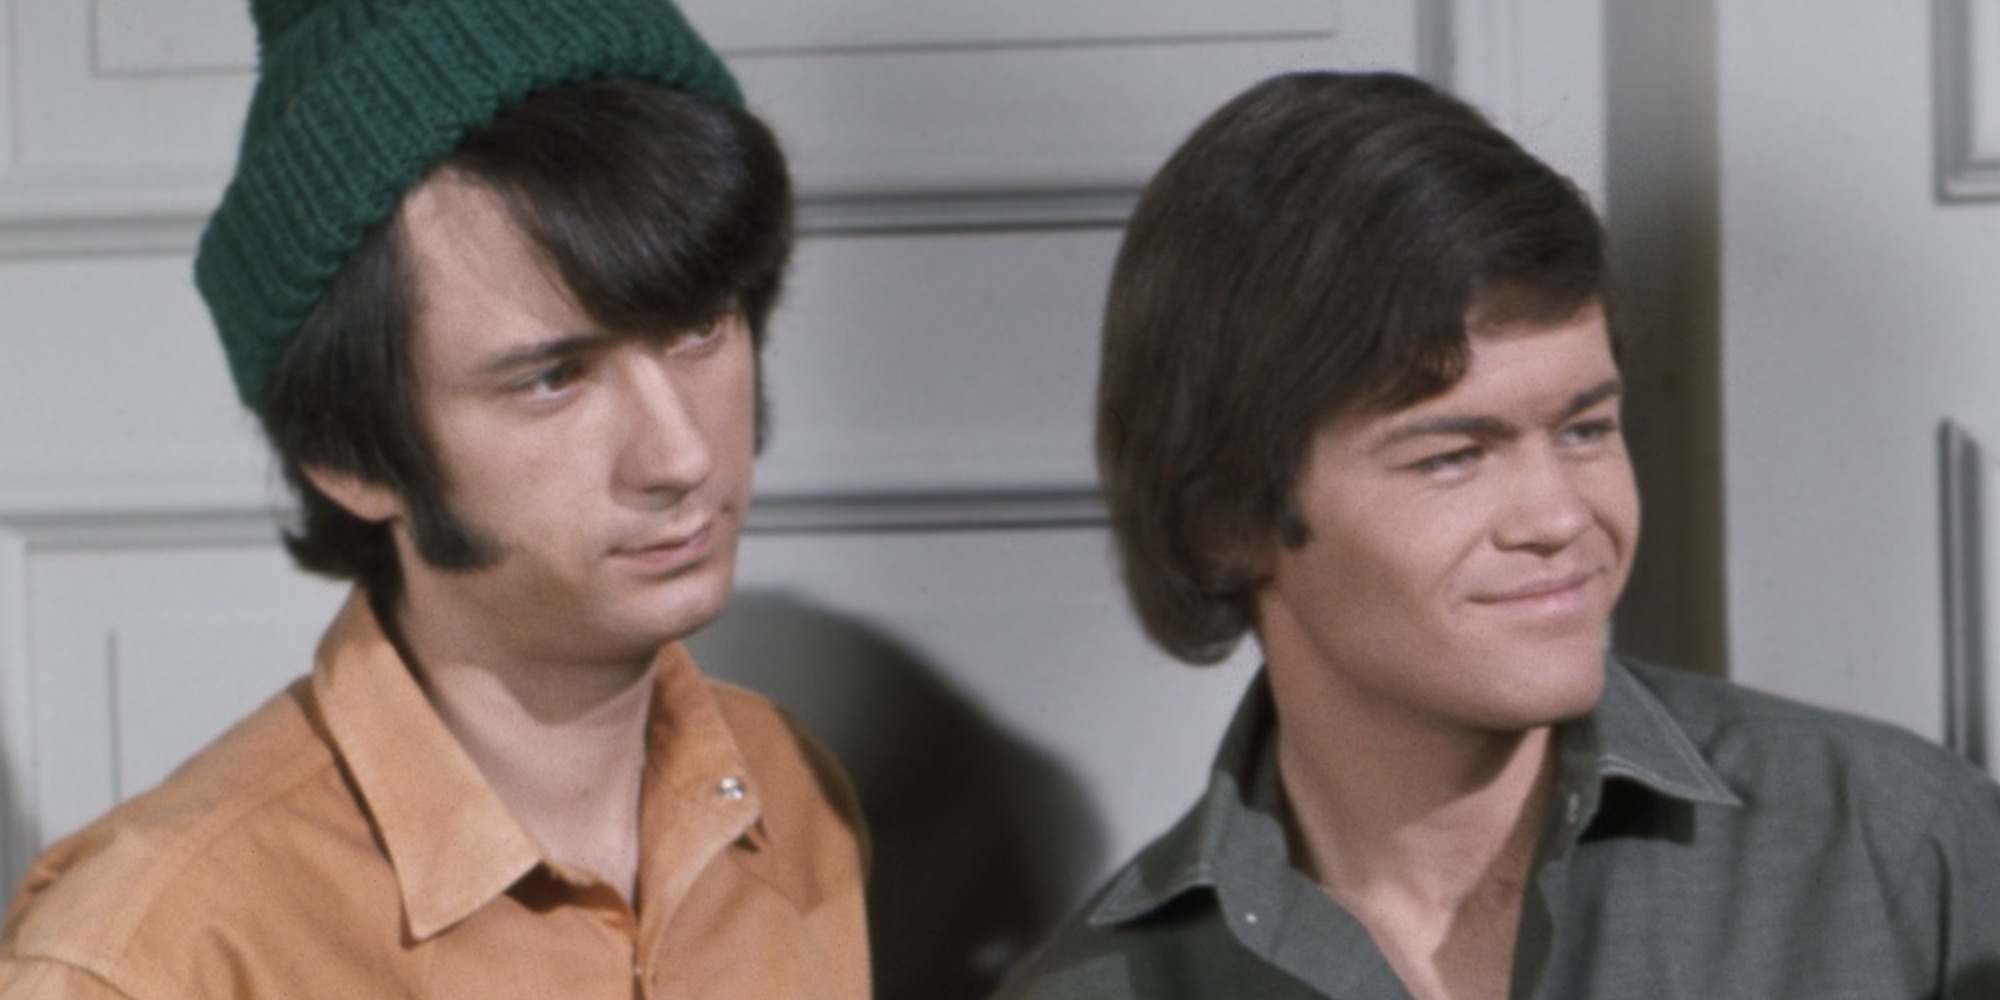 Mike Nesmith and Micky Dolenz on the set of The Monkees.